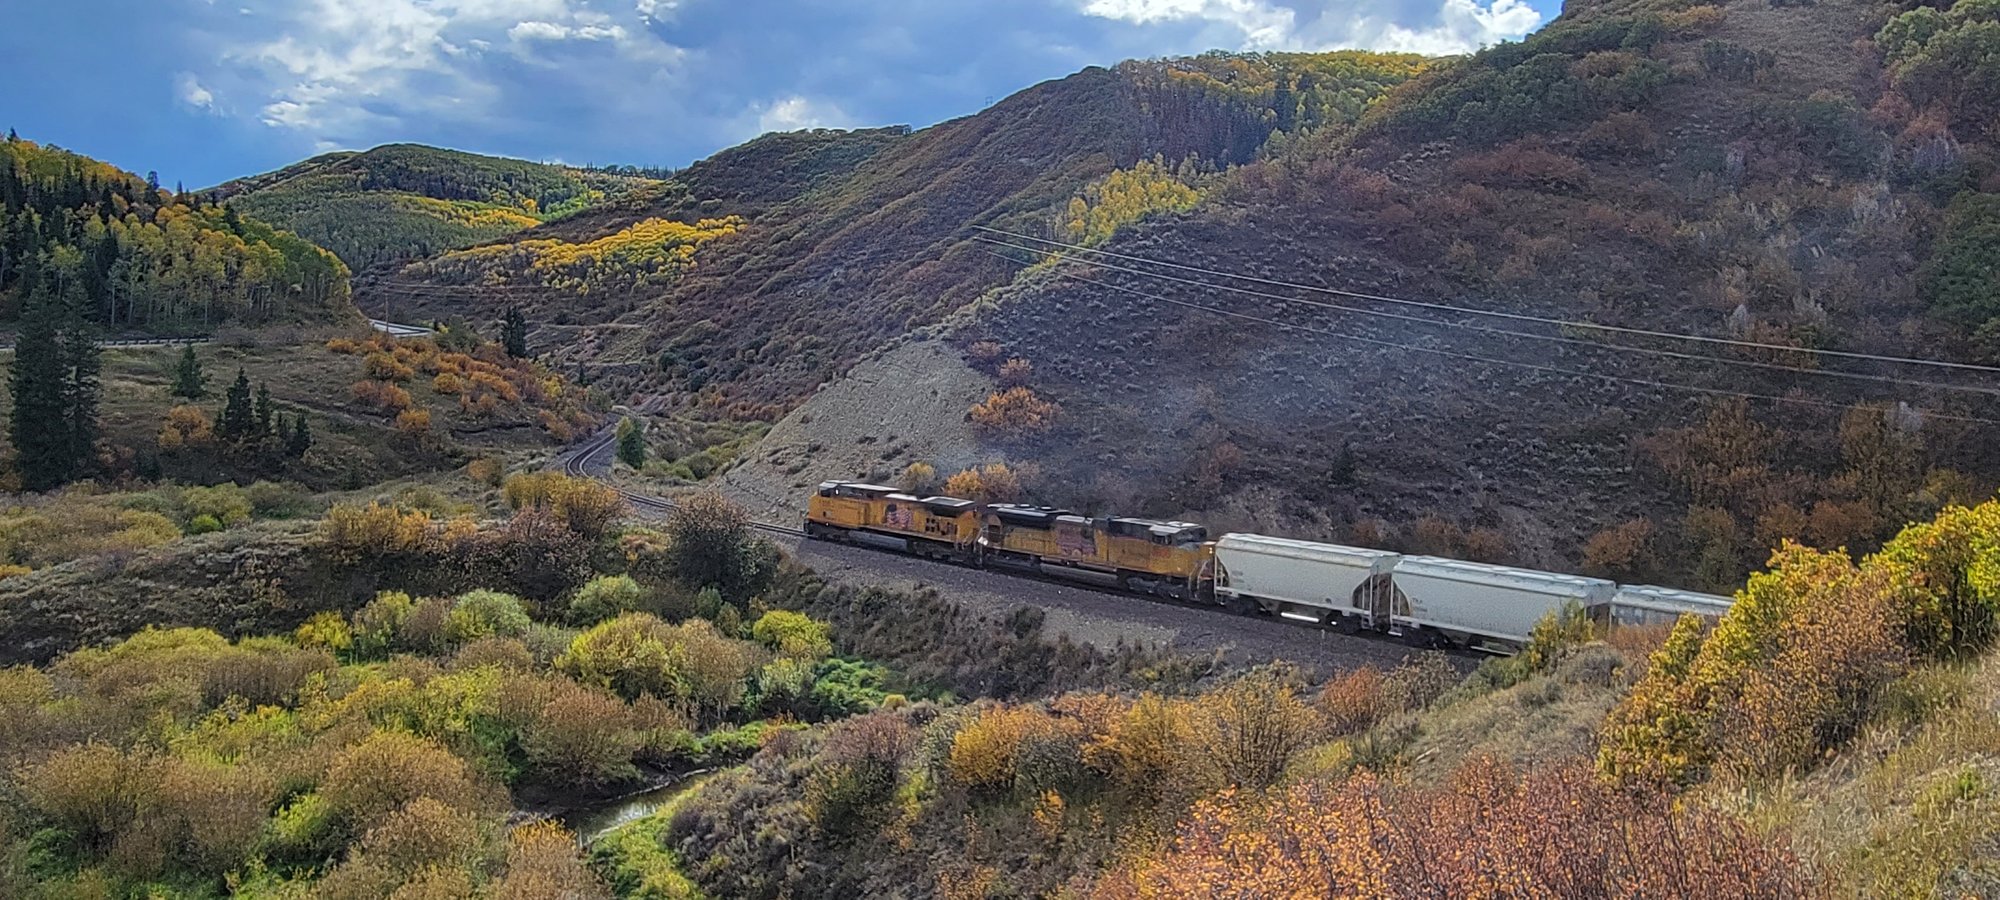 Train near Steamboat Springs, CO | Transportation & Infrastructure in the Yampa Valley | RCEDP